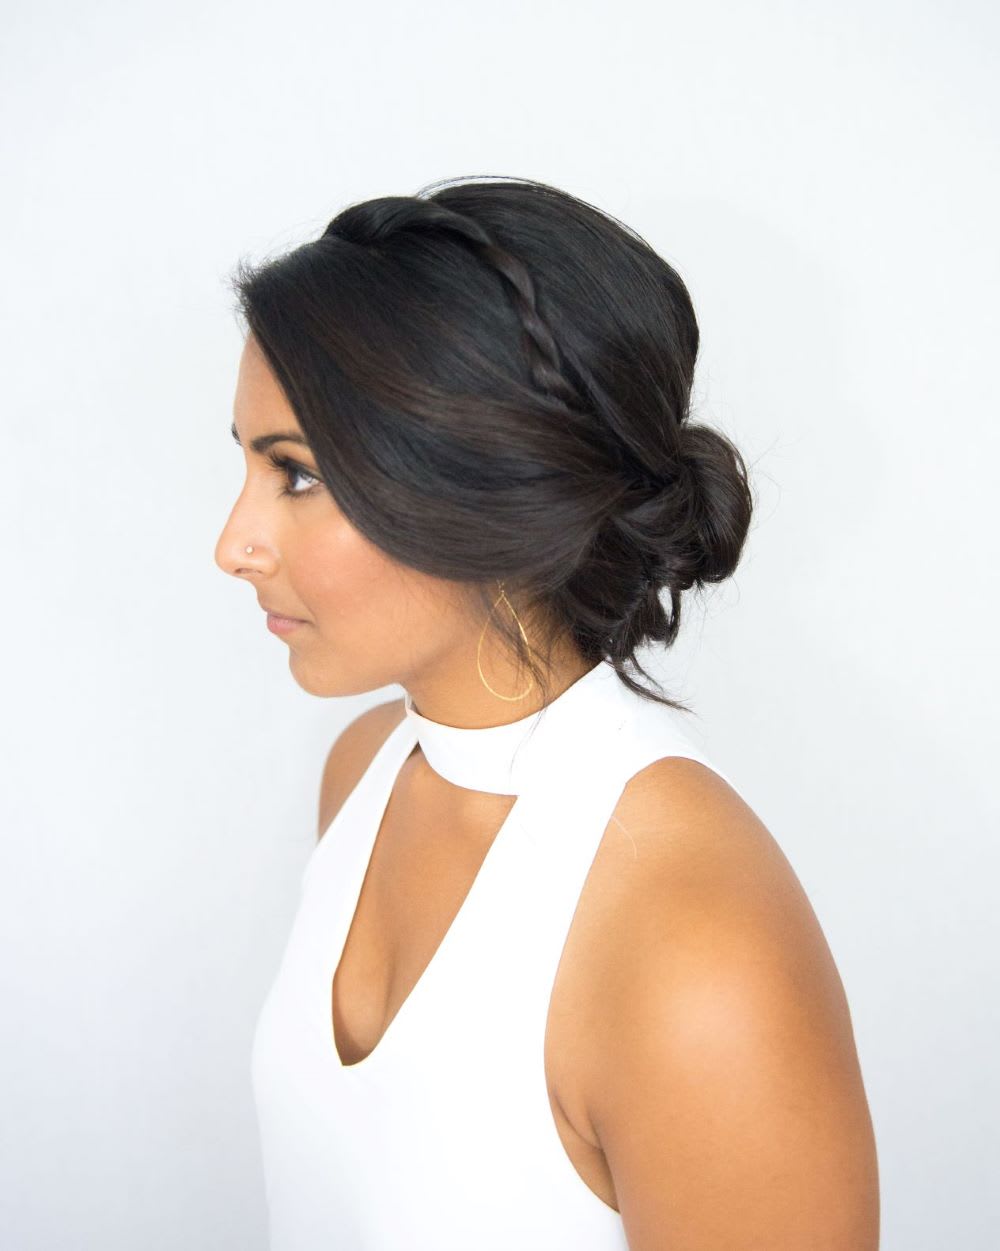 This Stunning Low Bun Hairstyle is Perfect for Your Next Occasion